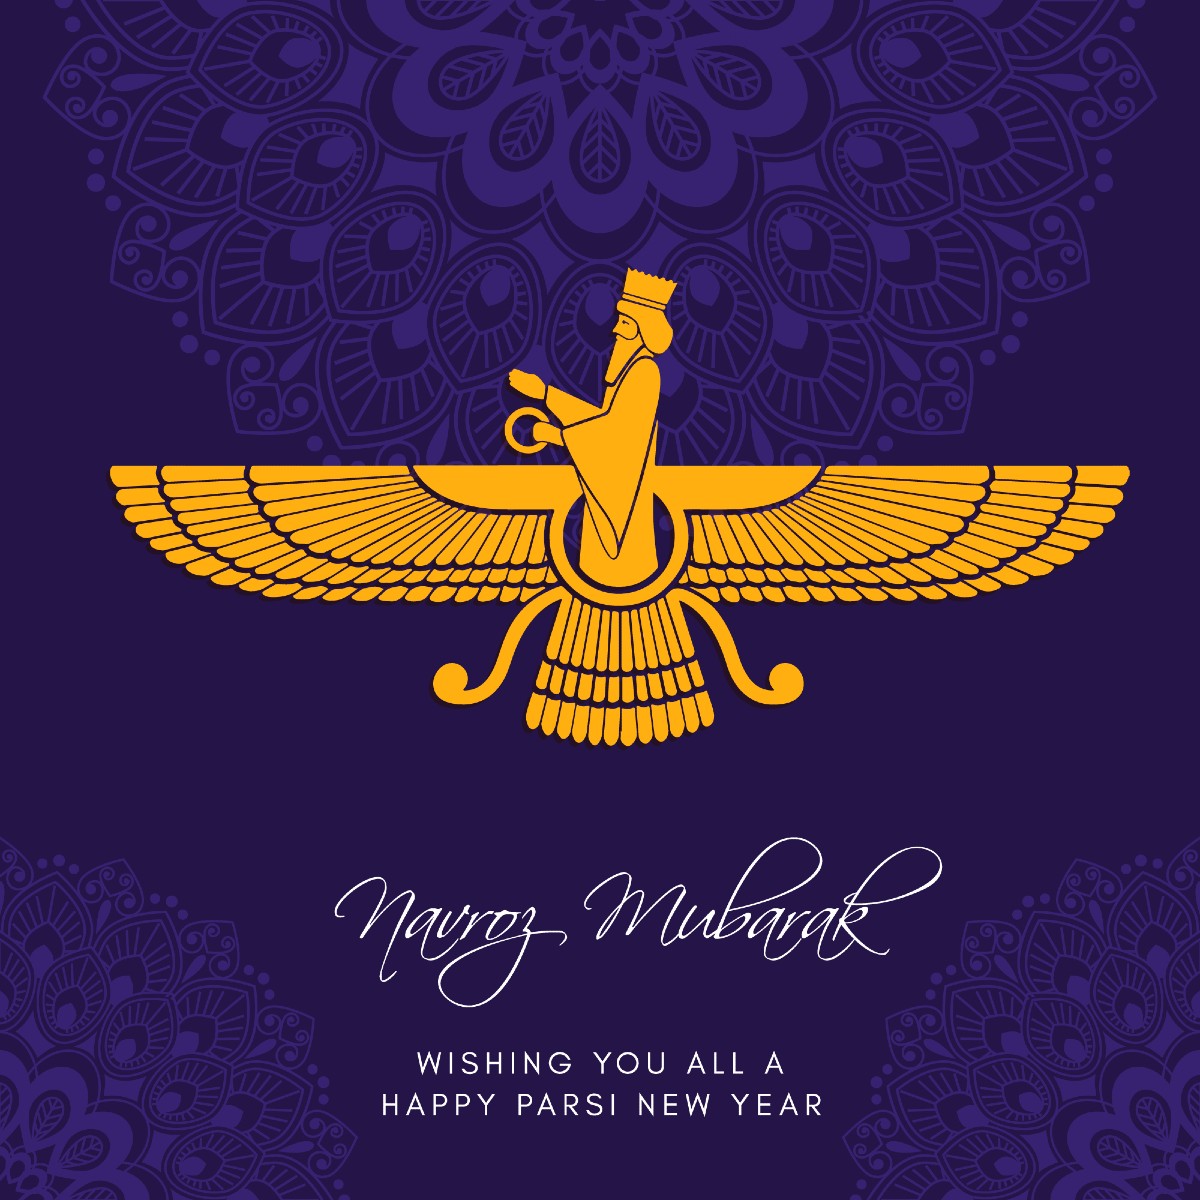 Parsi New Year 2021 Images, Wishes, Quotes and Messages to Send to